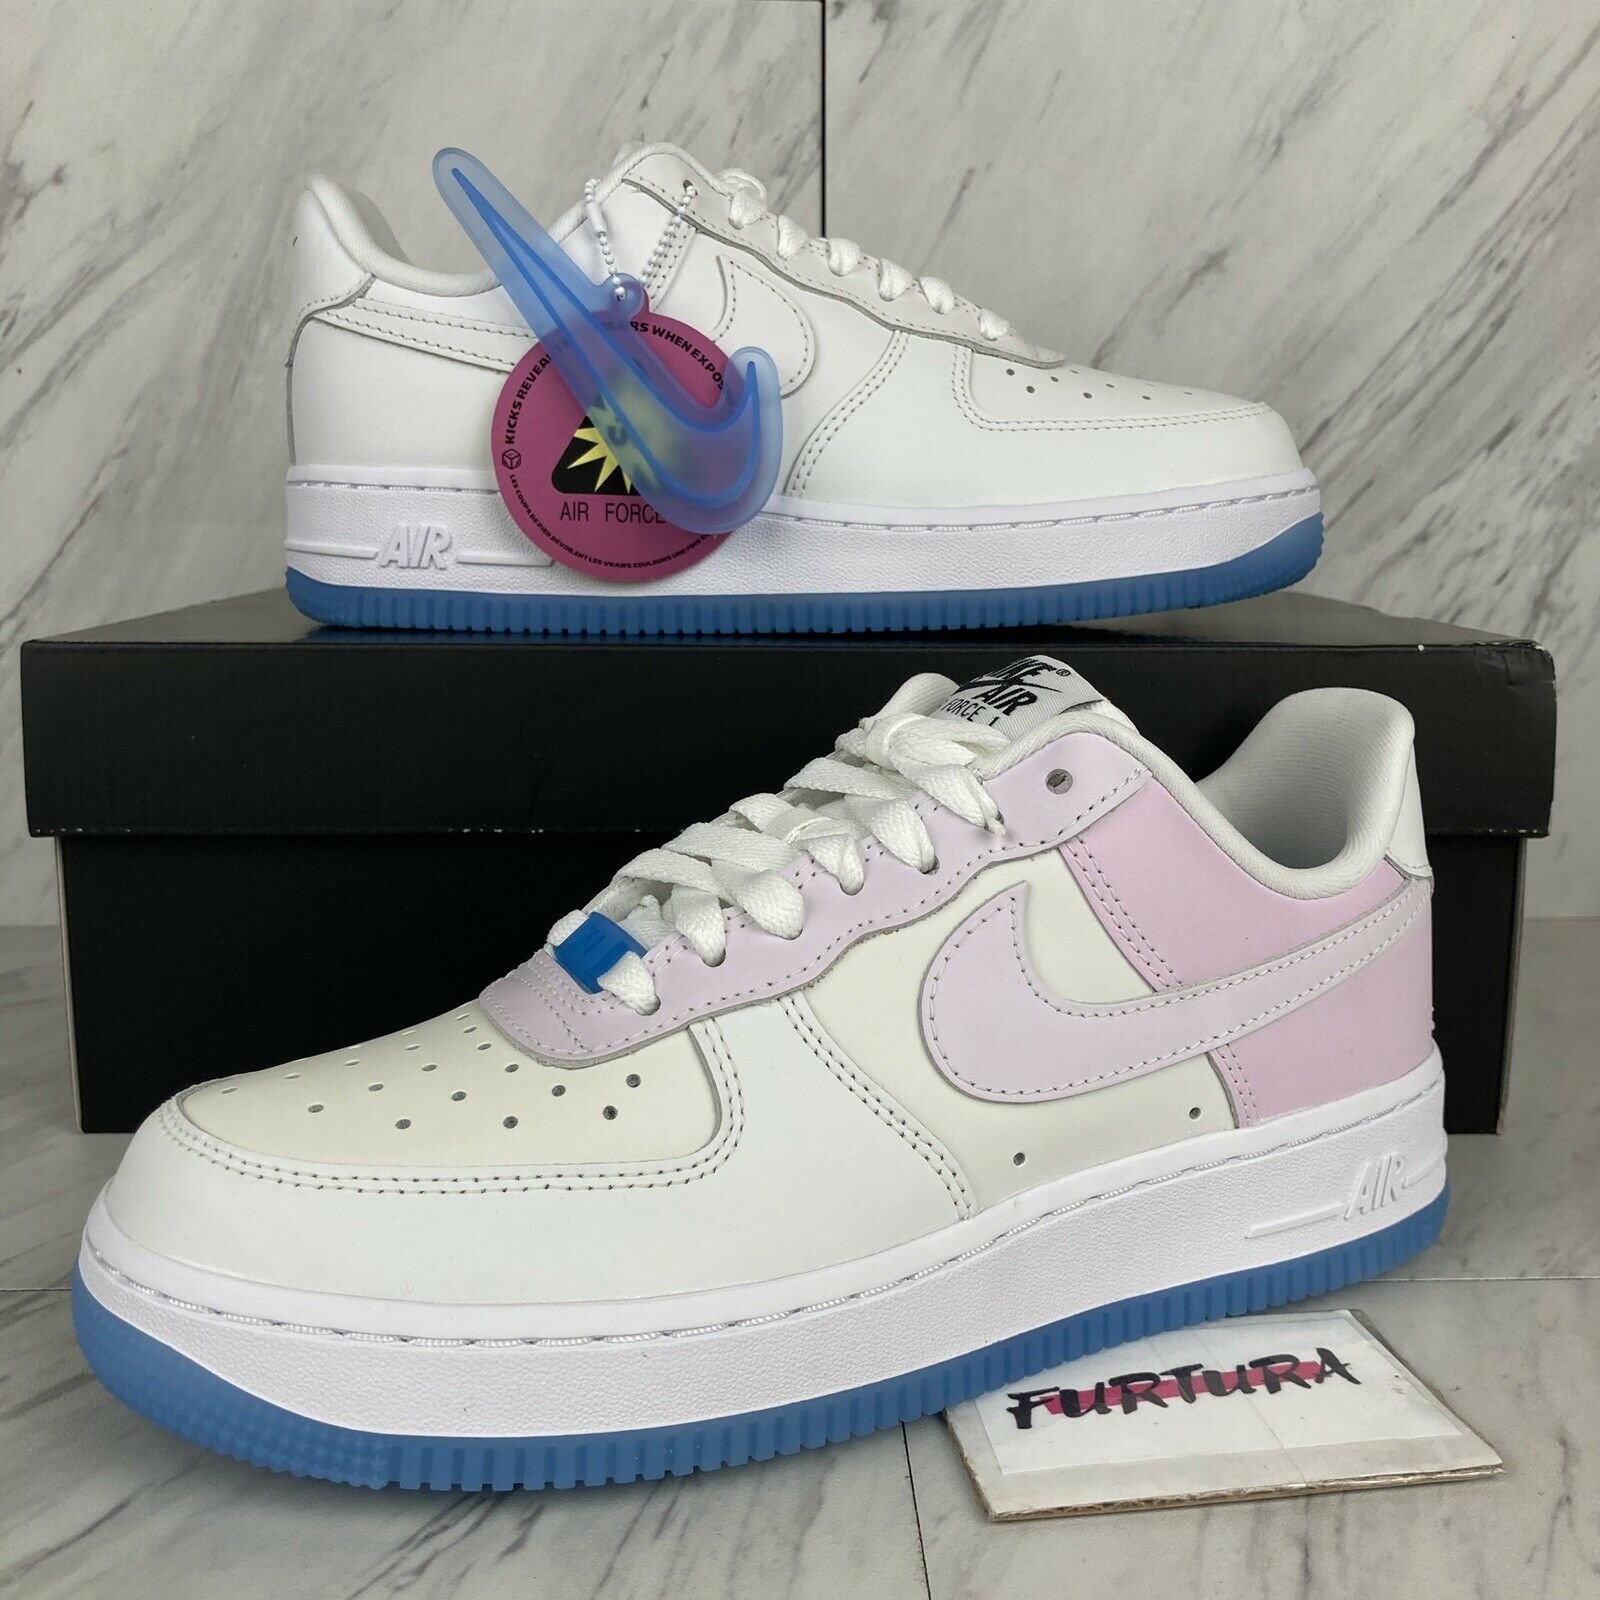 Nike Air Force 1 '07 Womens Size 6.5 Shoes UV Reactive Color Changing DA8301-100